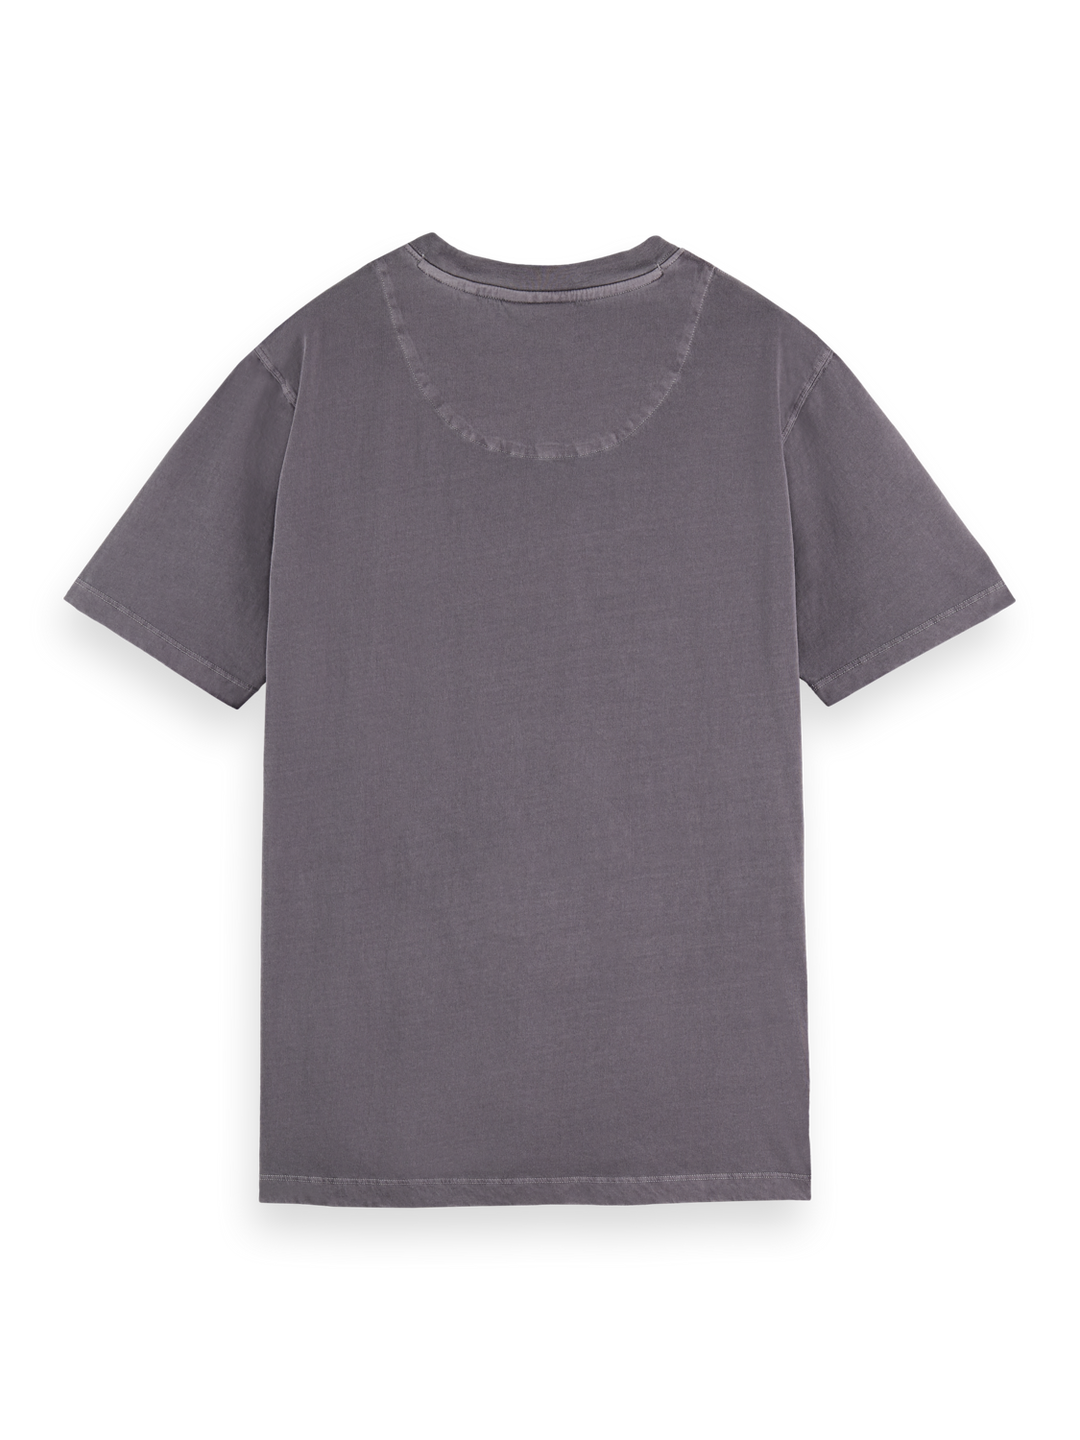 Garment Dyed Crewneck Tee with Logo in Graphite | Buster McGee